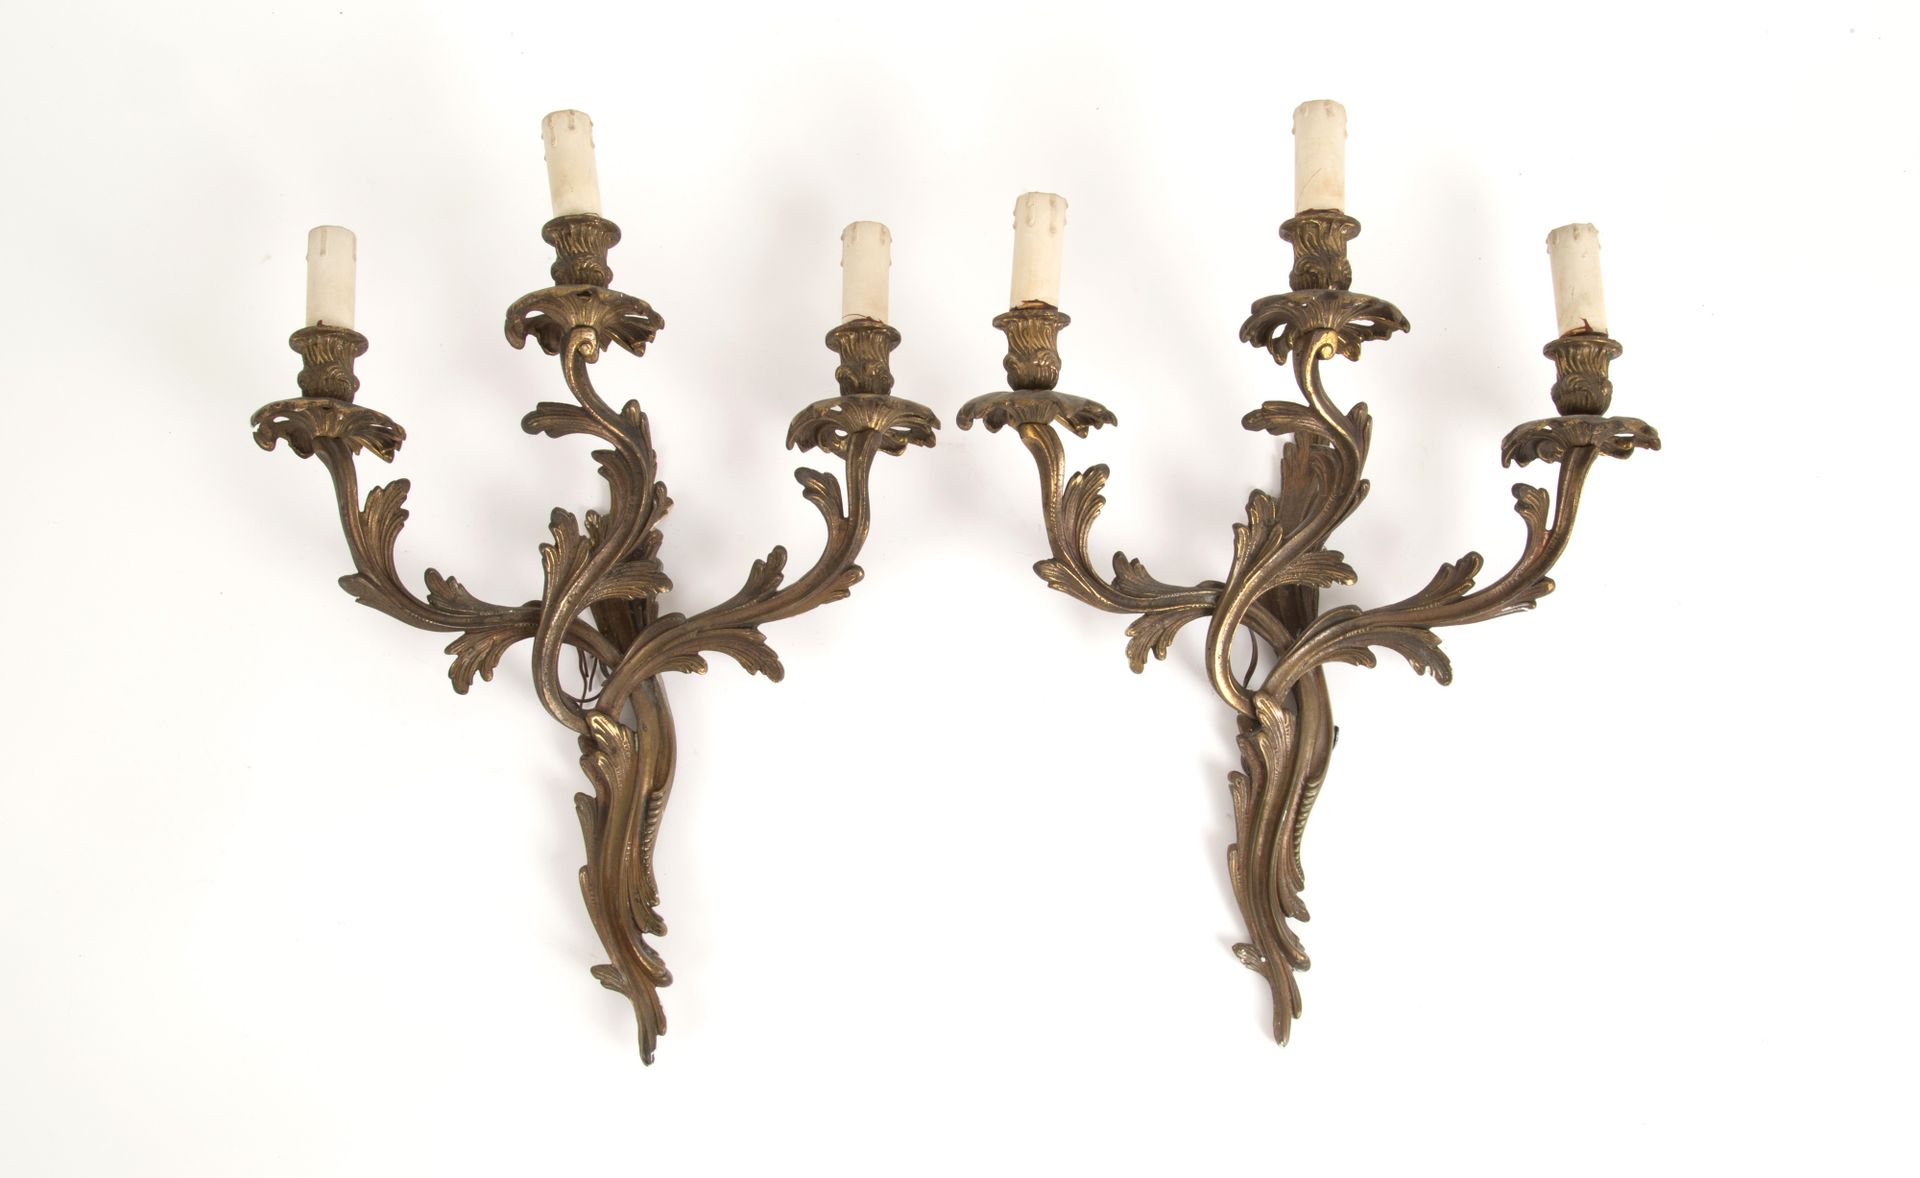 Pair of three-flame wall lights Pair of three-flame bronze wall sconces. Early 2&hellip;